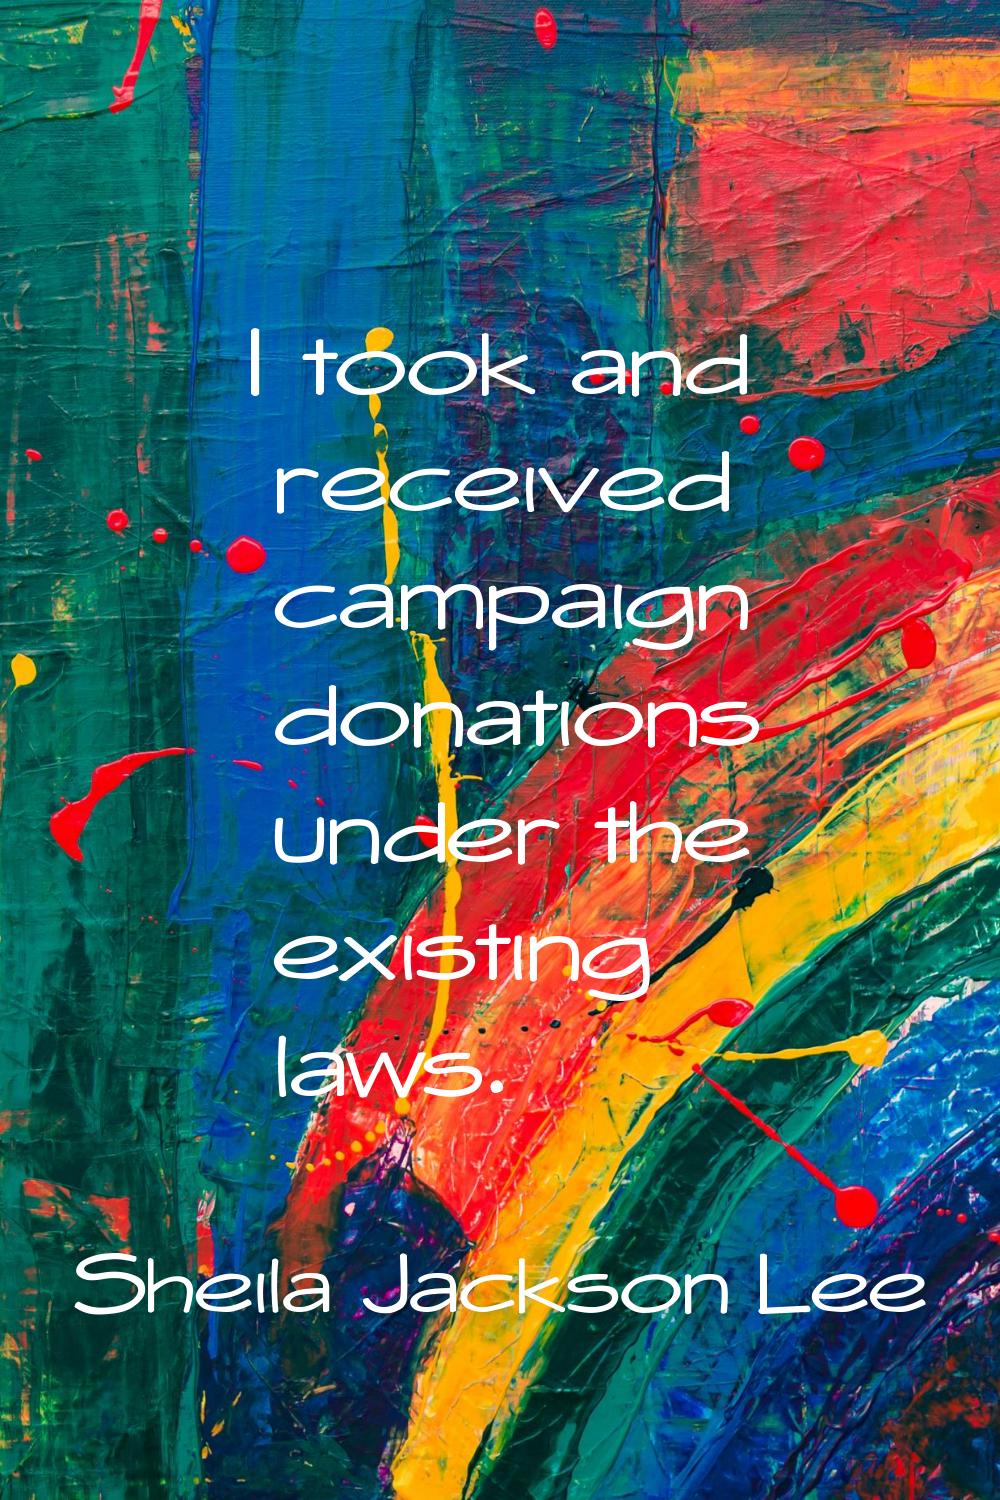 I took and received campaign donations under the existing laws.